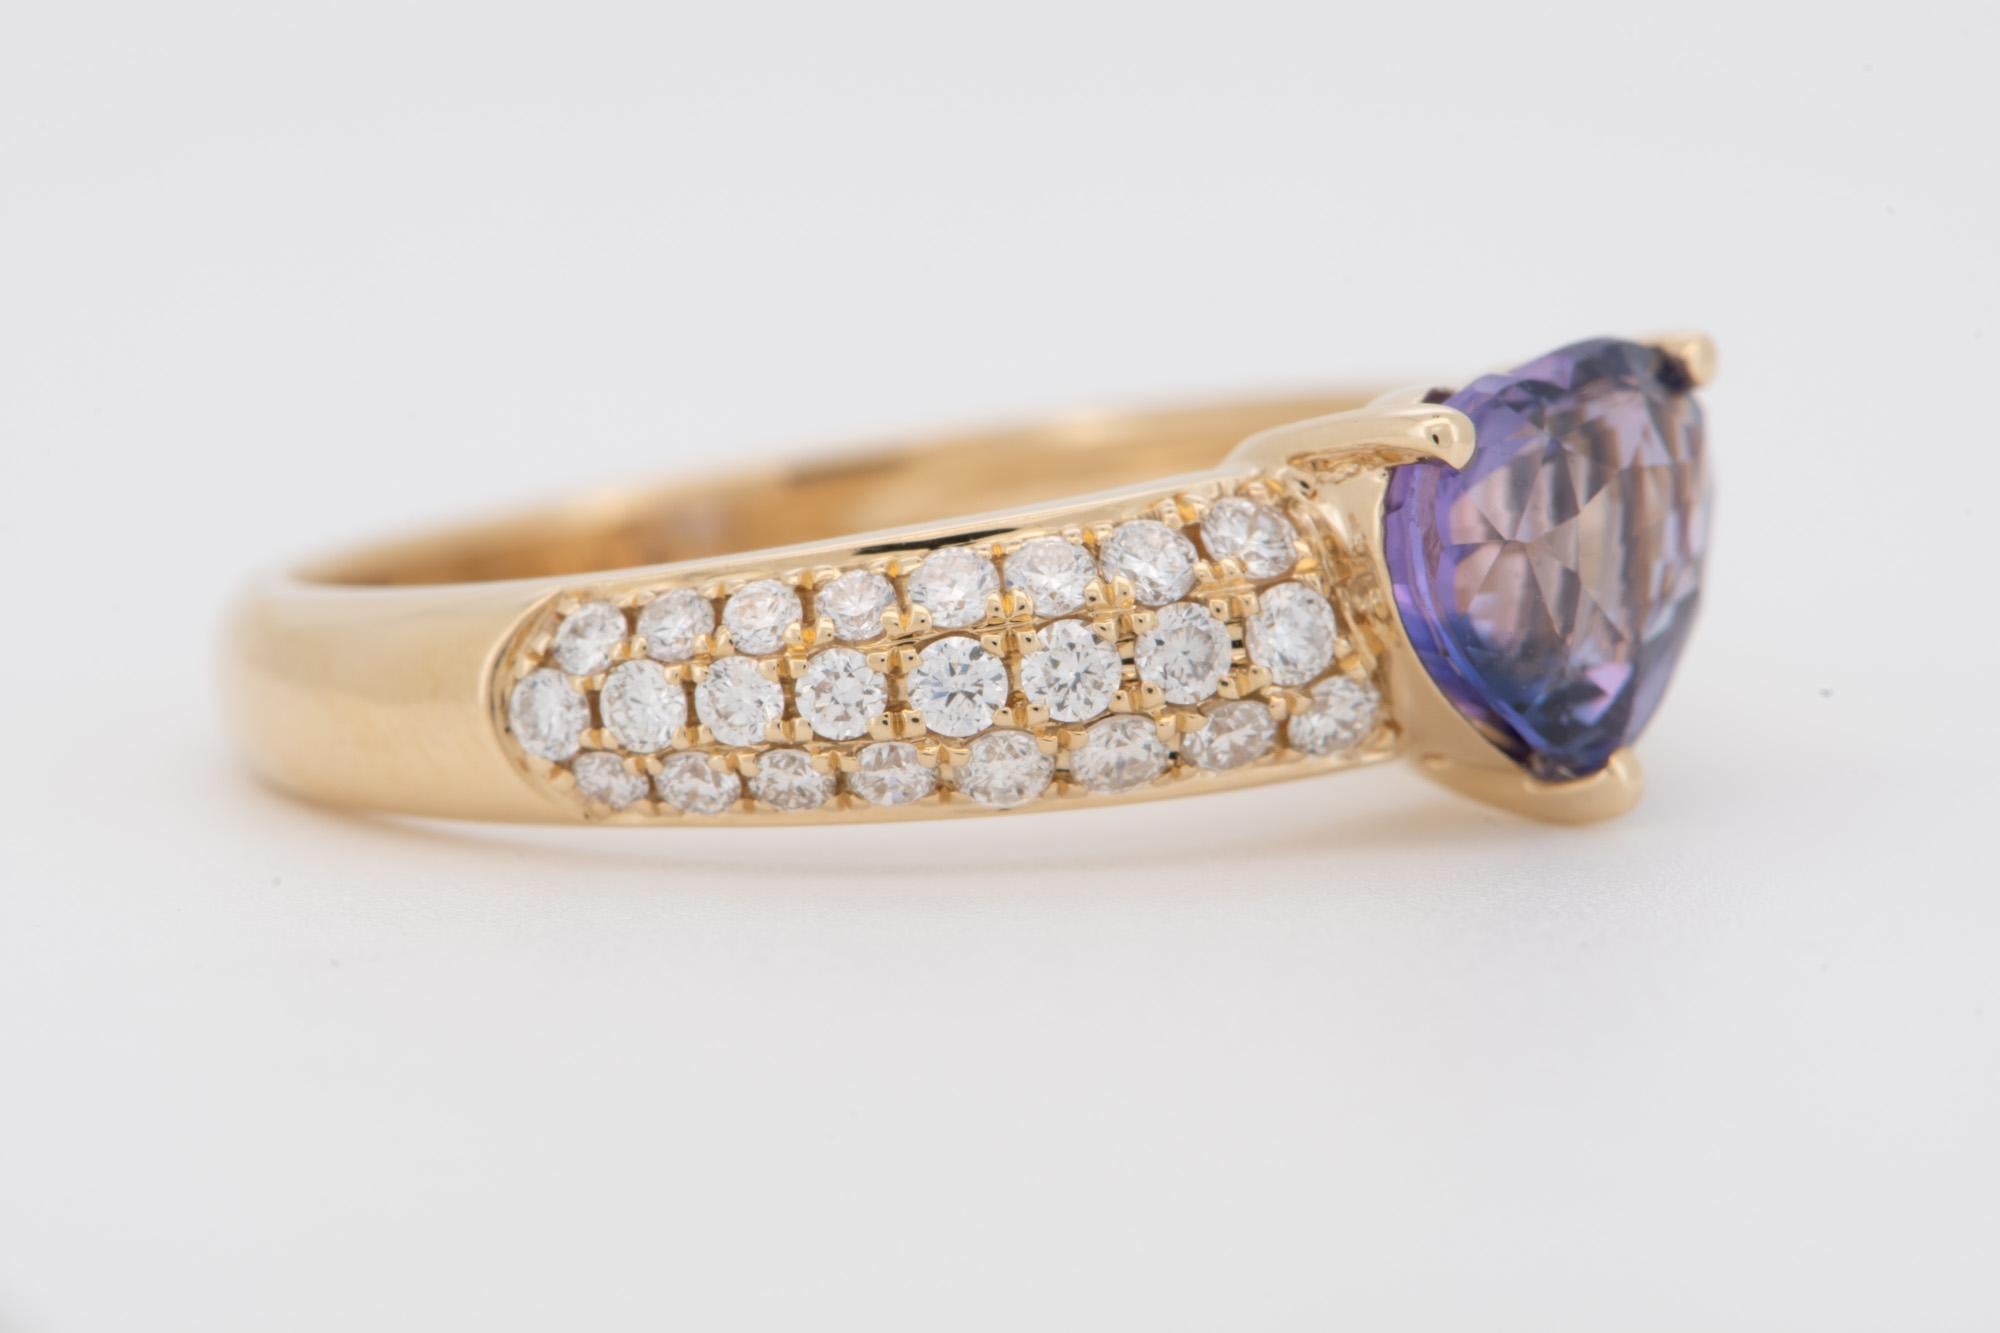 1.5ct Pinkish Purple Sapphire on Diamond Pave Engagement Ring 14K Gold R6499 In New Condition For Sale In Osprey, FL